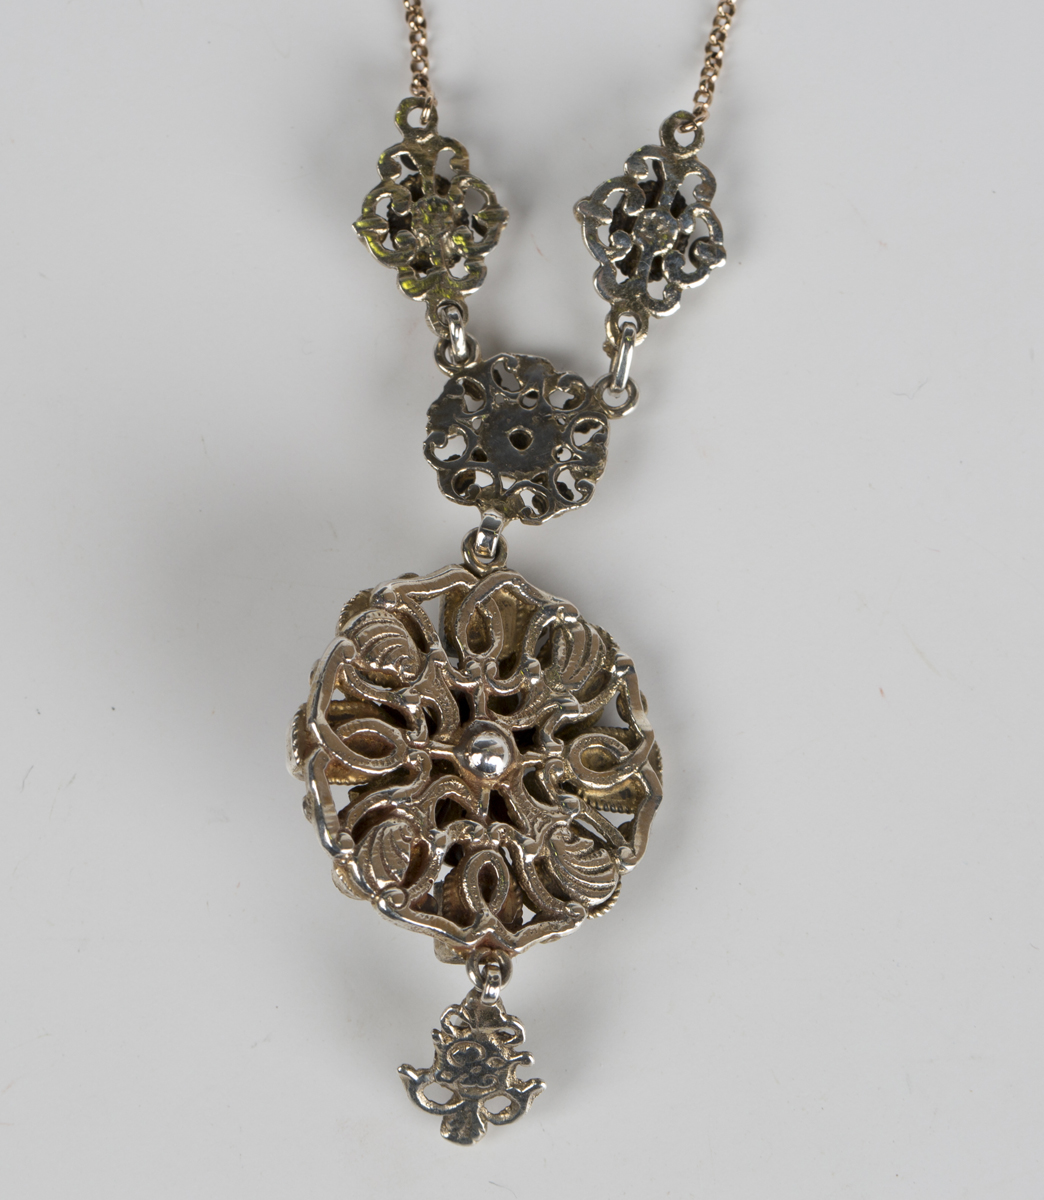 A foil backed garnet, foil backed emerald, cultured pearl and enamelled pendant necklace, probably - Image 2 of 2